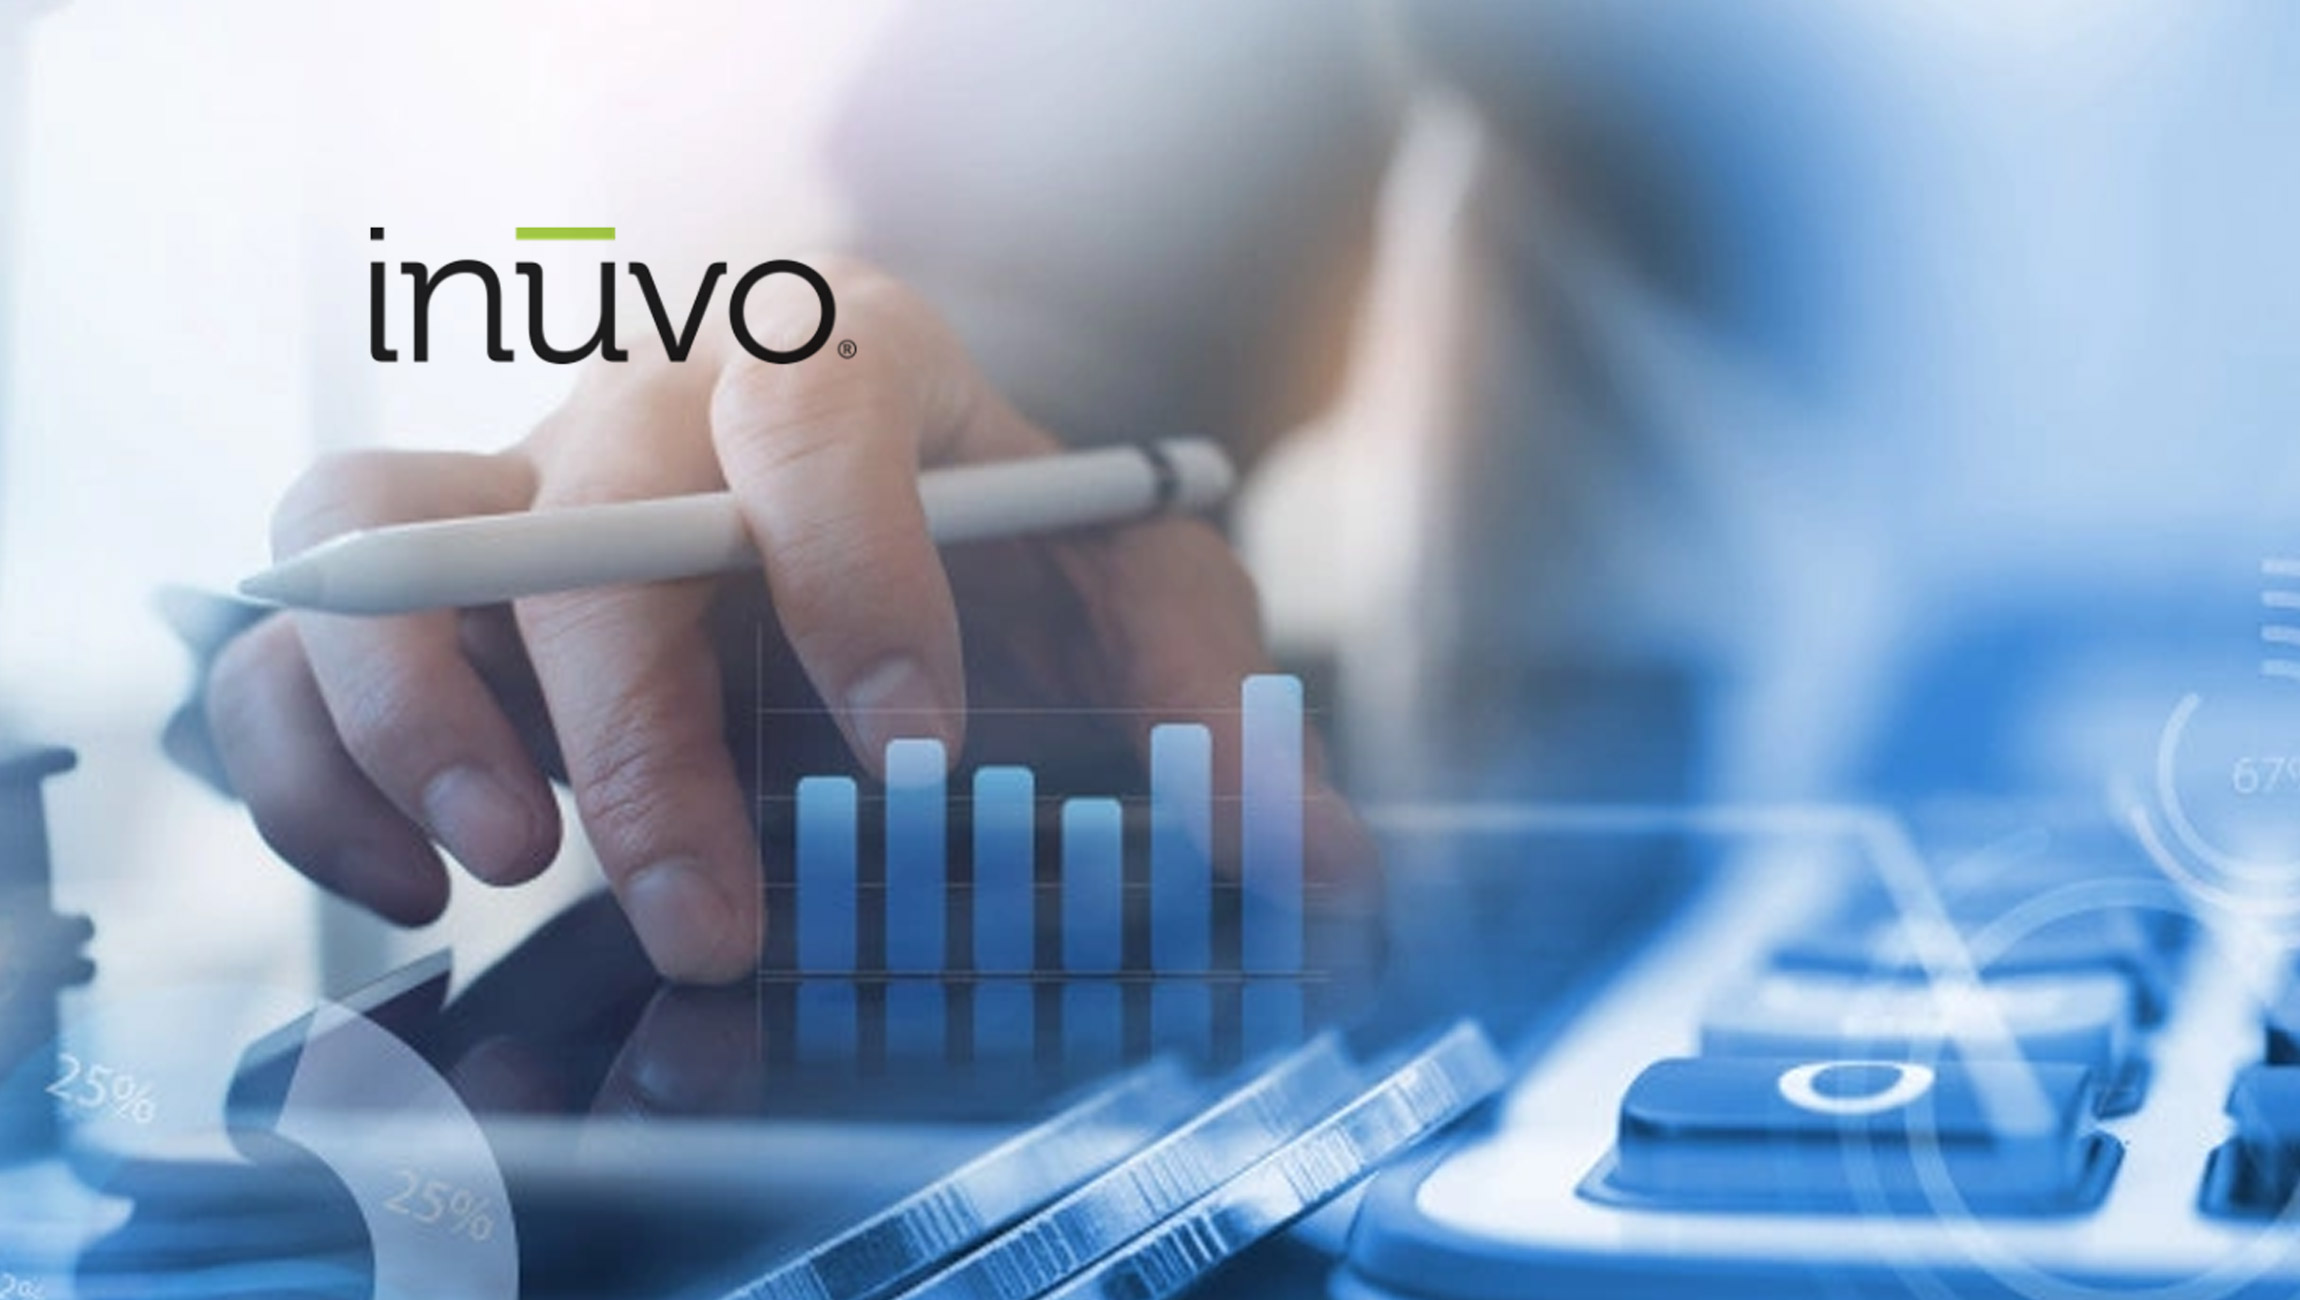 Inuvo Revenue Increases 75% to $18.6 Million for the First Quarter of 2022 1